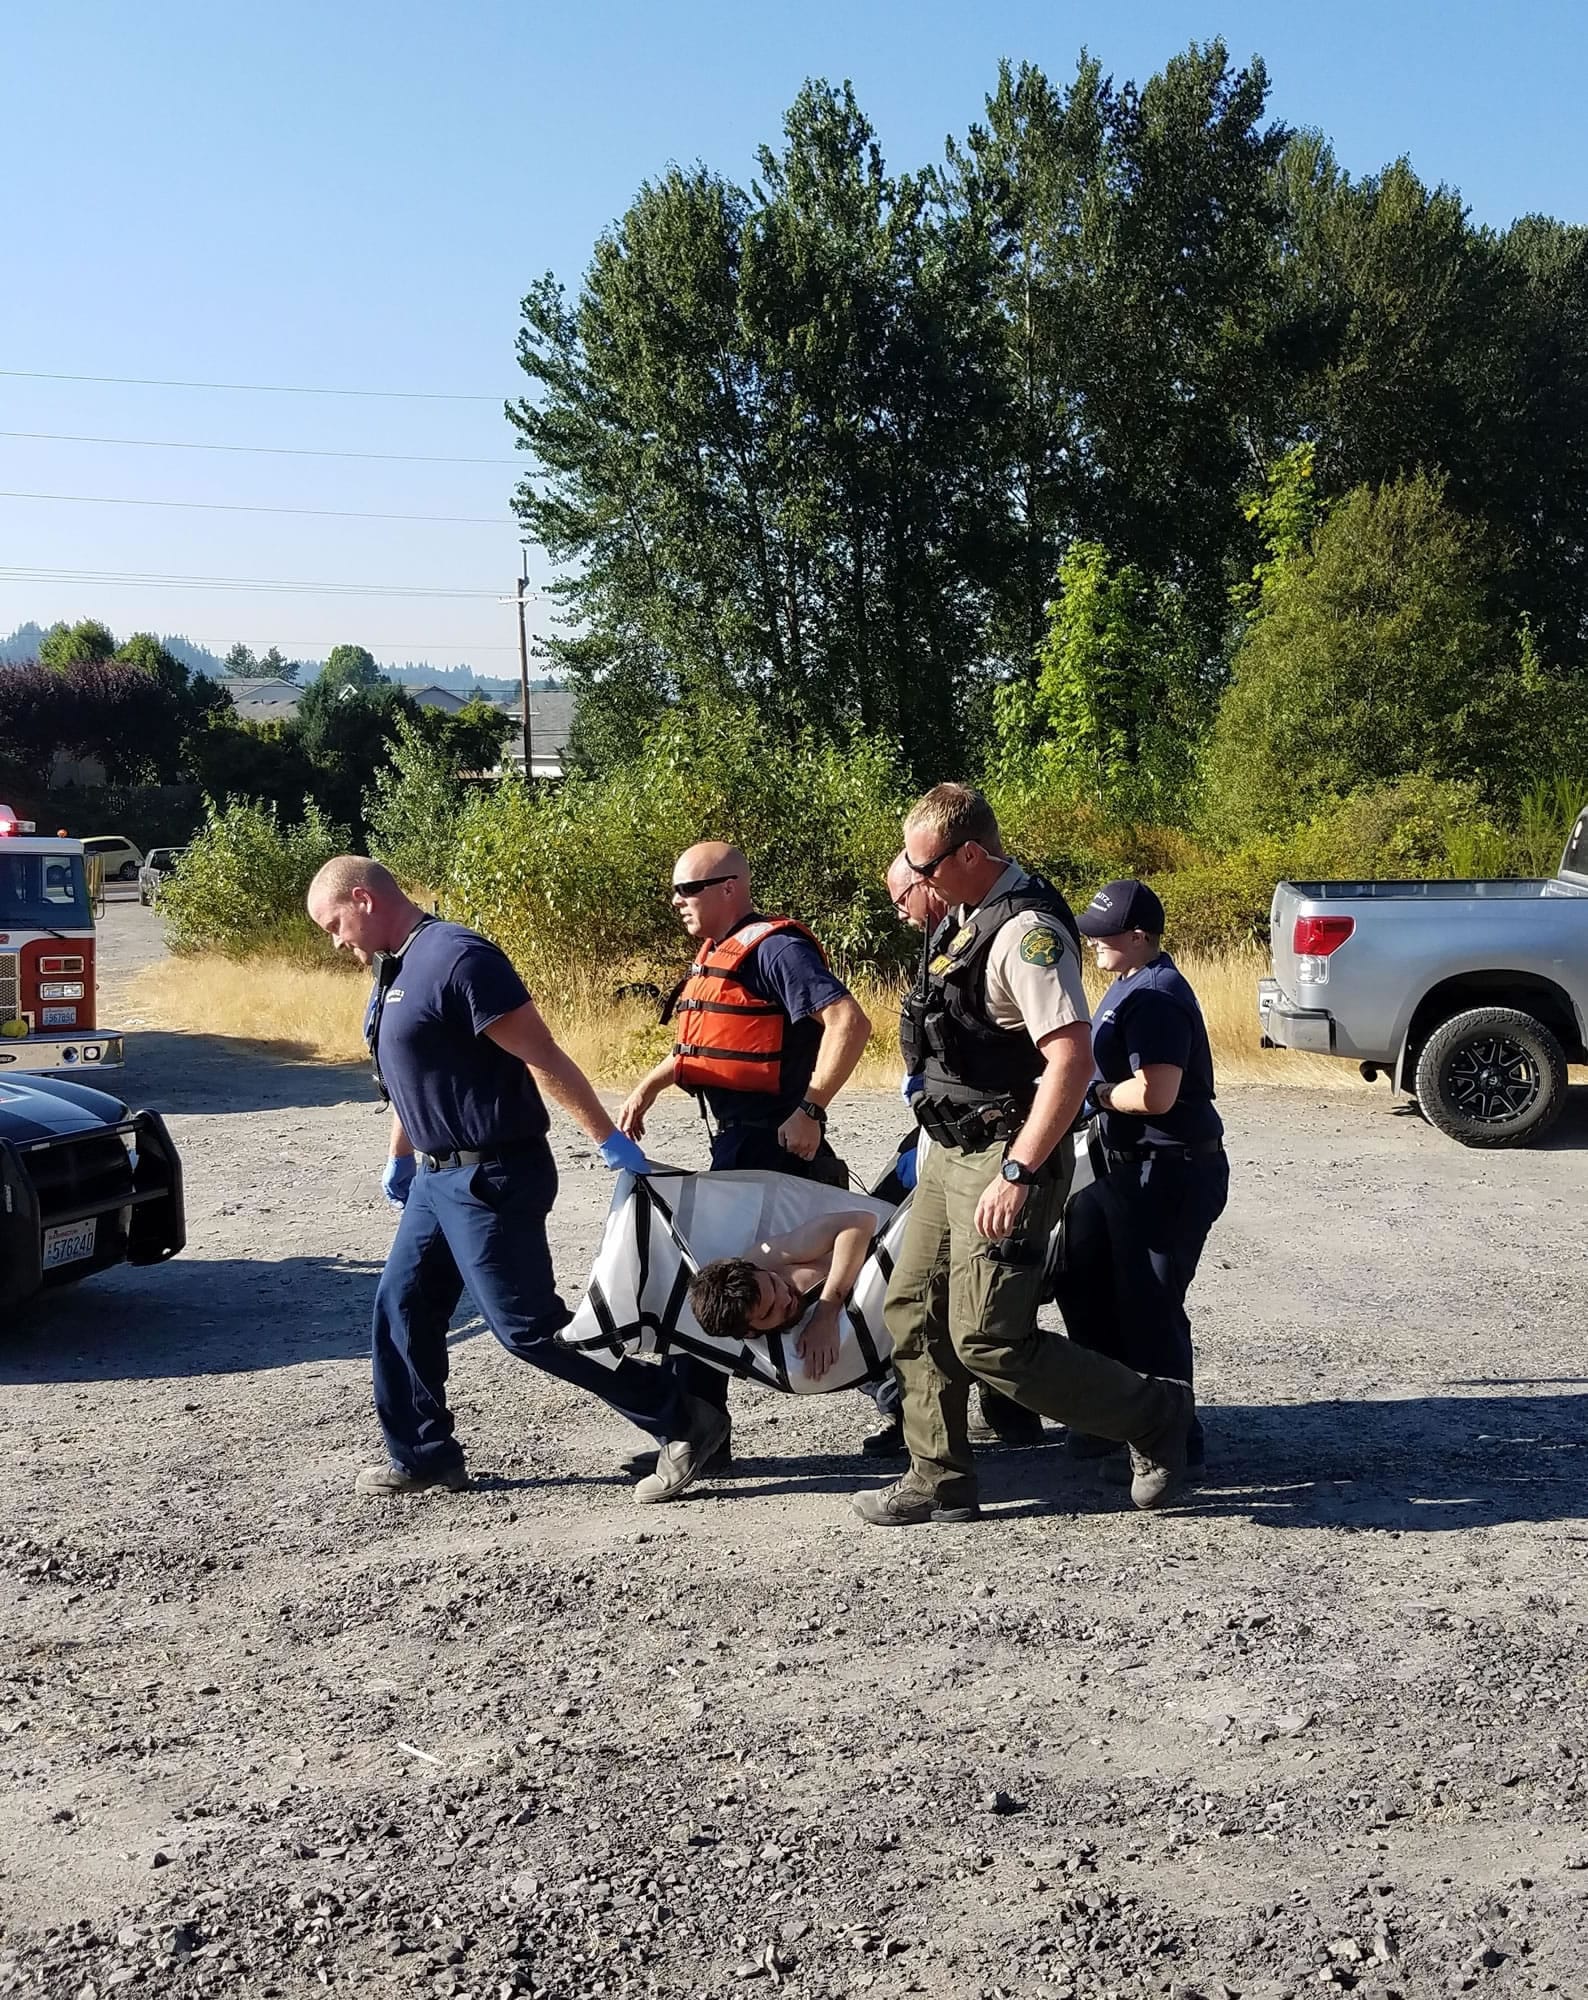 A man on a WaveRunner rescued a person who was close to drowning in the Cowlitz River Tuesday evening.